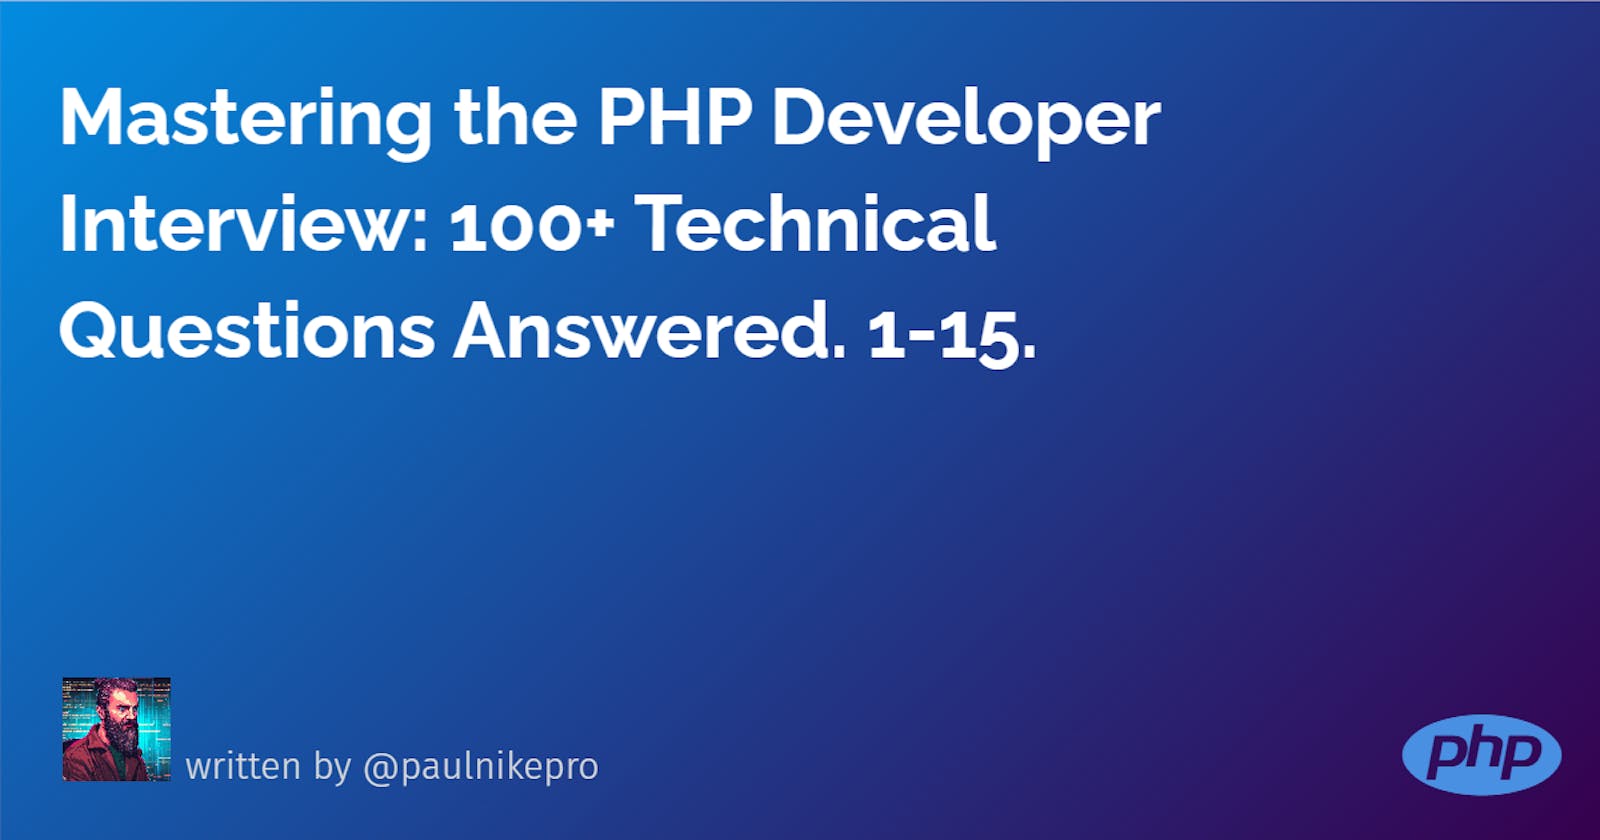 Mastering the PHP Developer Interview: 100+ Technical Questions Answered. 1-15.